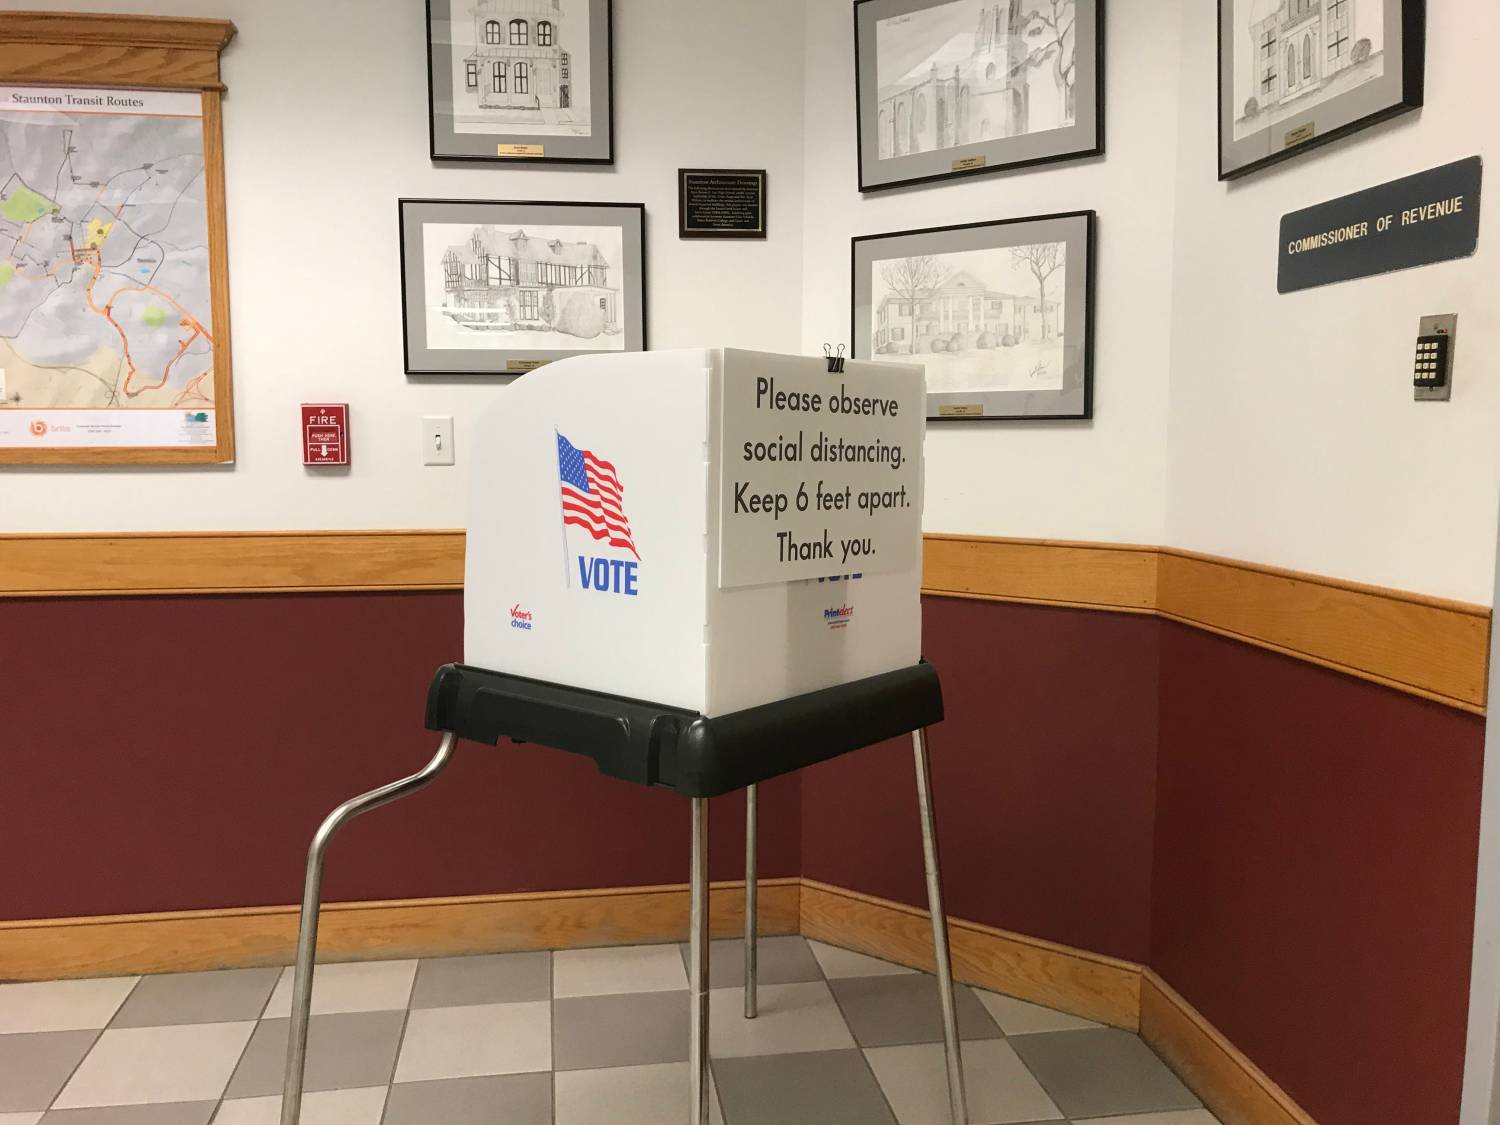 I VOTED TODAY: Private voting booths are provided inside Staunton City Hall in the lobby. Early voting is available weekdays from 9 a.m. to 5 p.m. at 116 W. Beverley St., ending at 5 p.m. the Saturday prior to the election. Photograph taken on Wednesday, Sept. 30, 2020.Img 9257